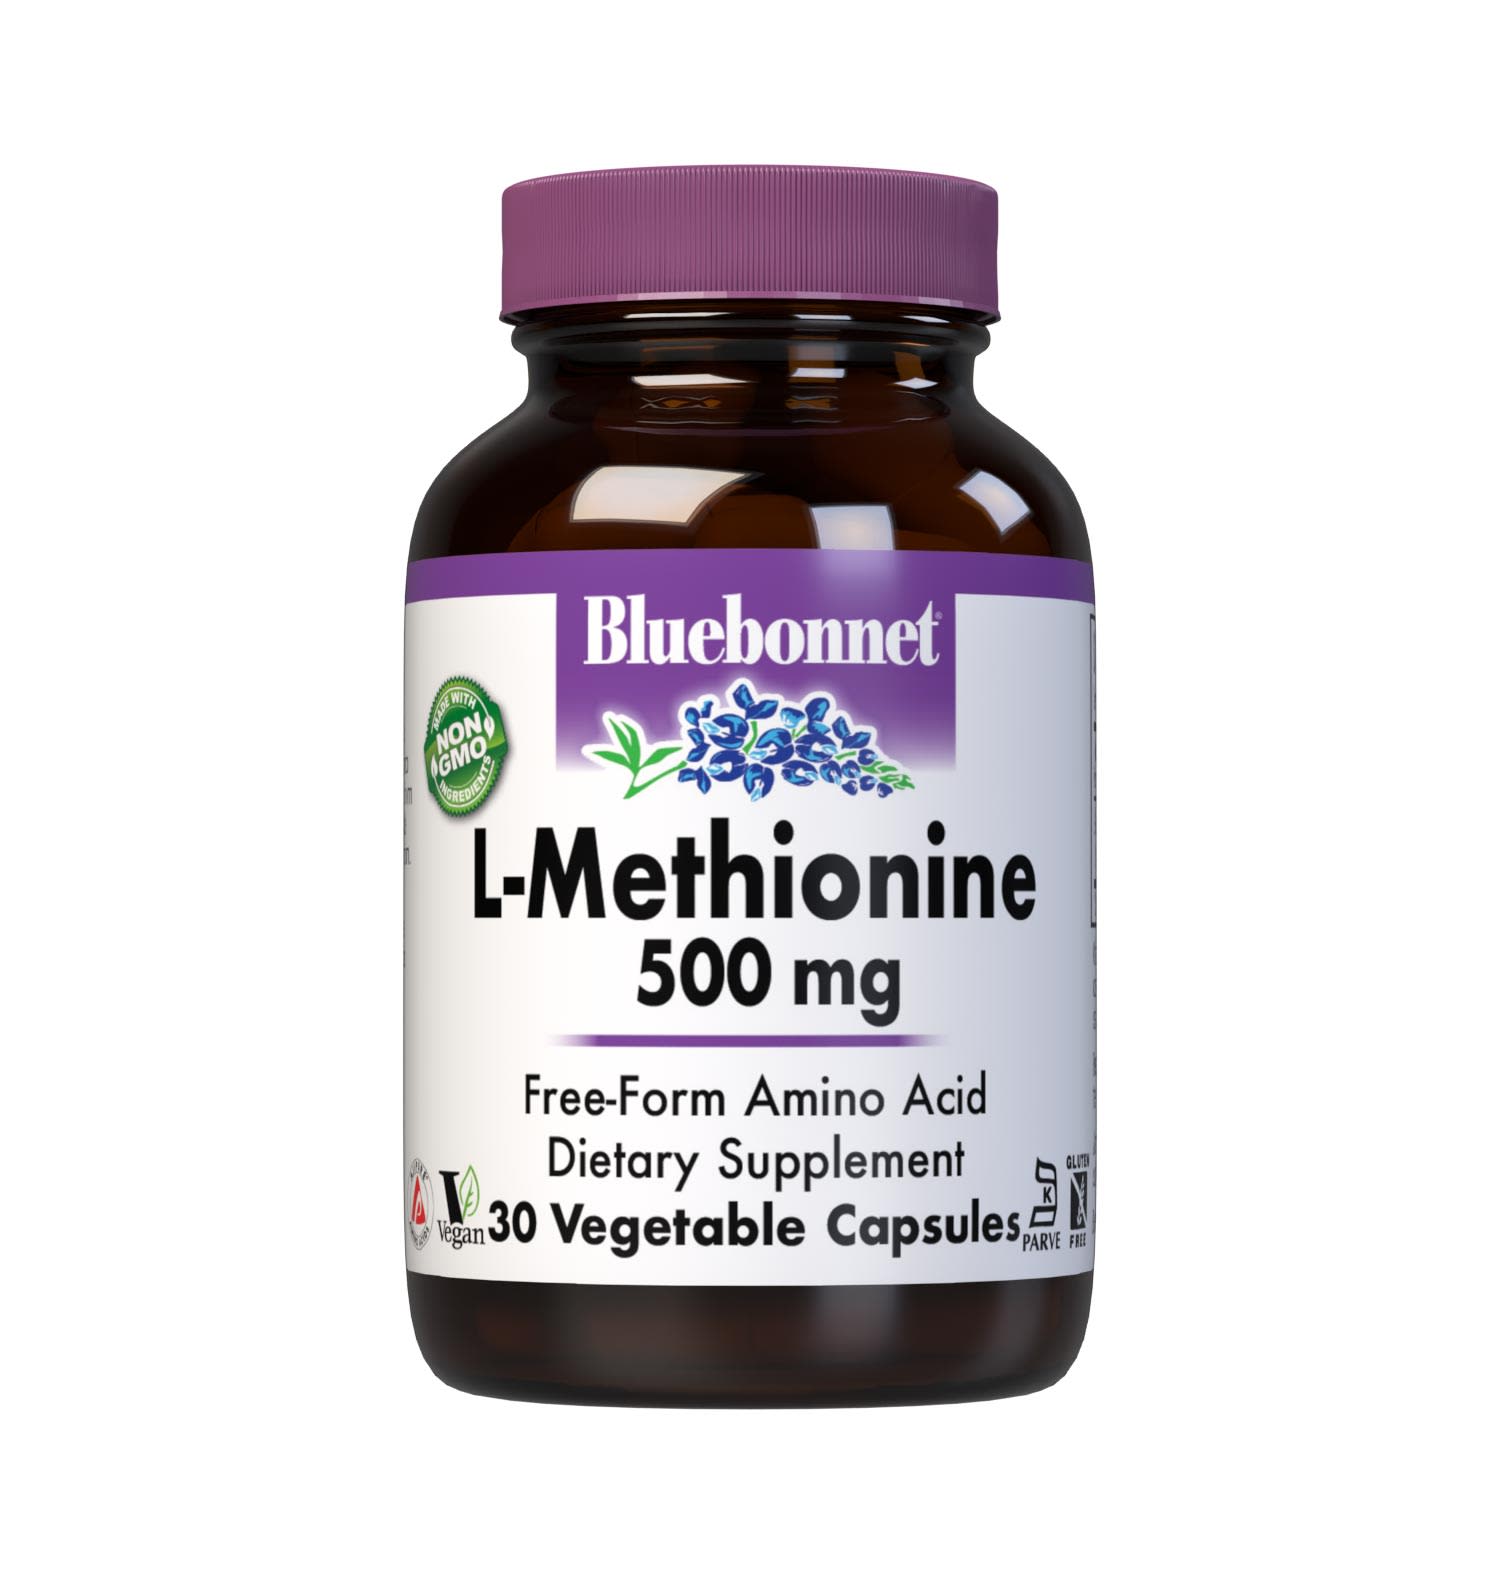 Bluebonnet’s L-Methionine 500 mg 30 Vegetable Capsules provide the pharmaceutical grade, free-form amino acid L-methionine in its crystalline form from Ajinomoto. #size_30 count